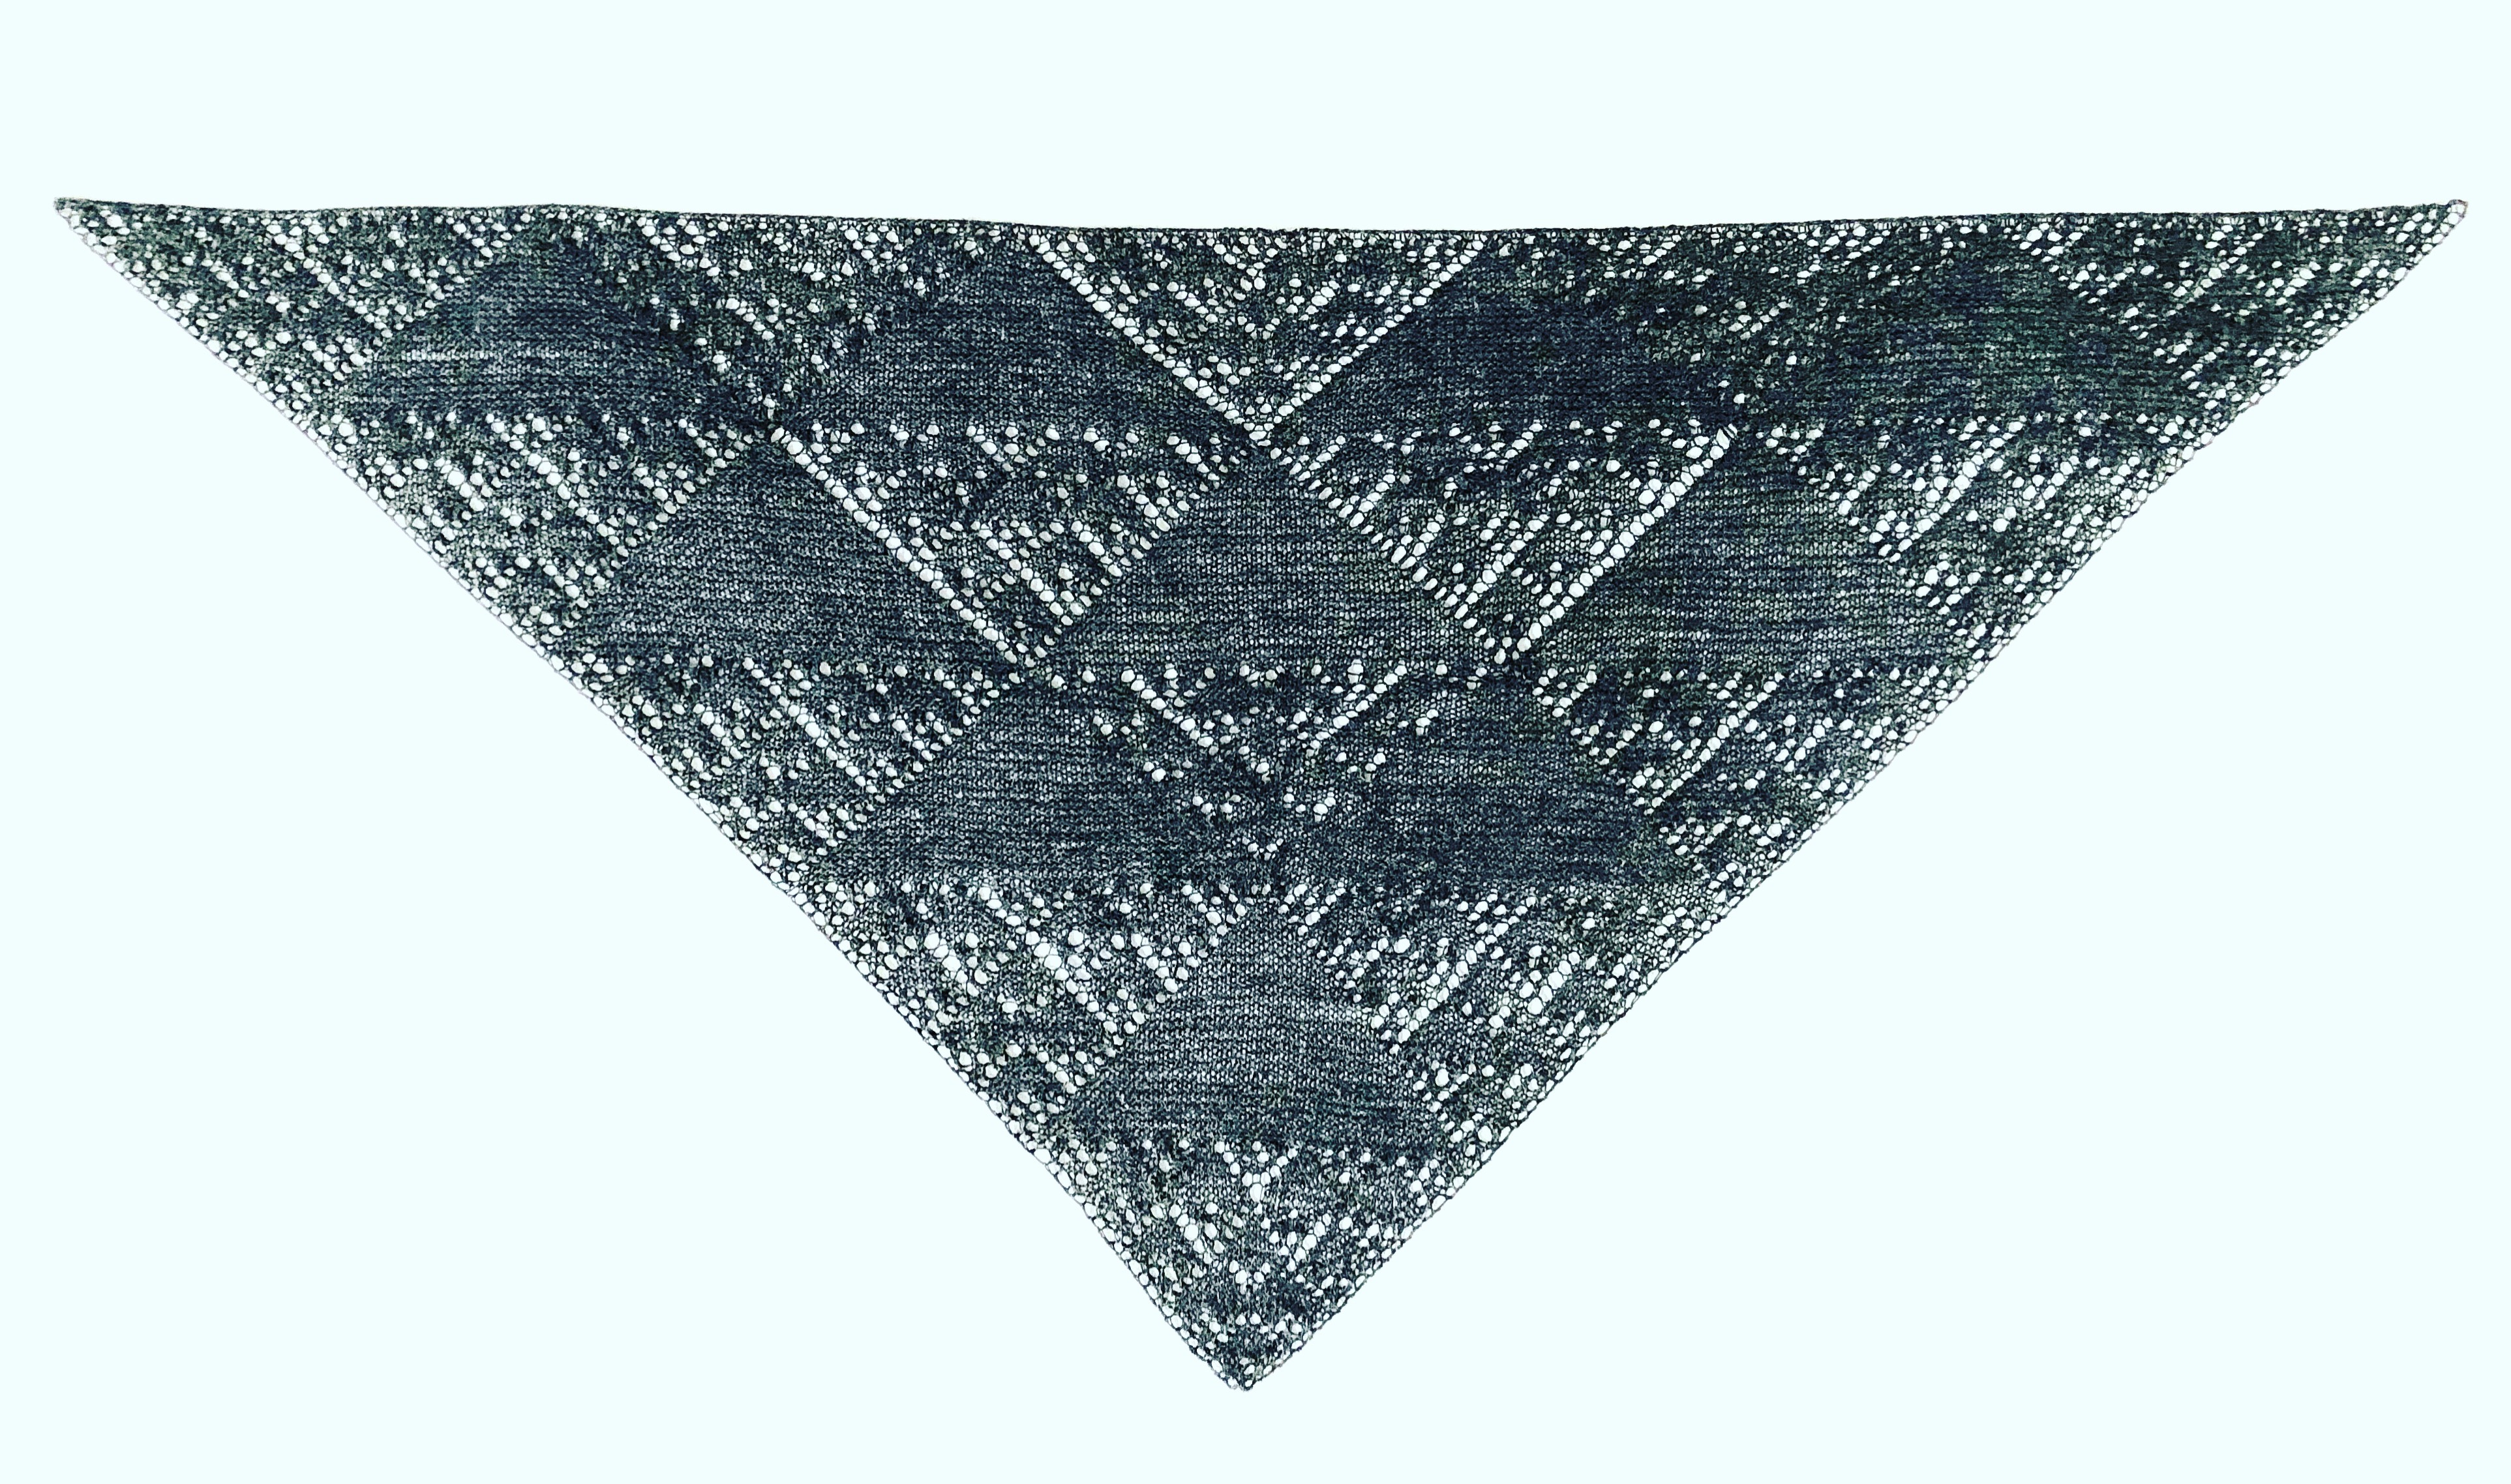 A shawl knitted according to the rule of Pascal's triangle mod 5, by brienne brown